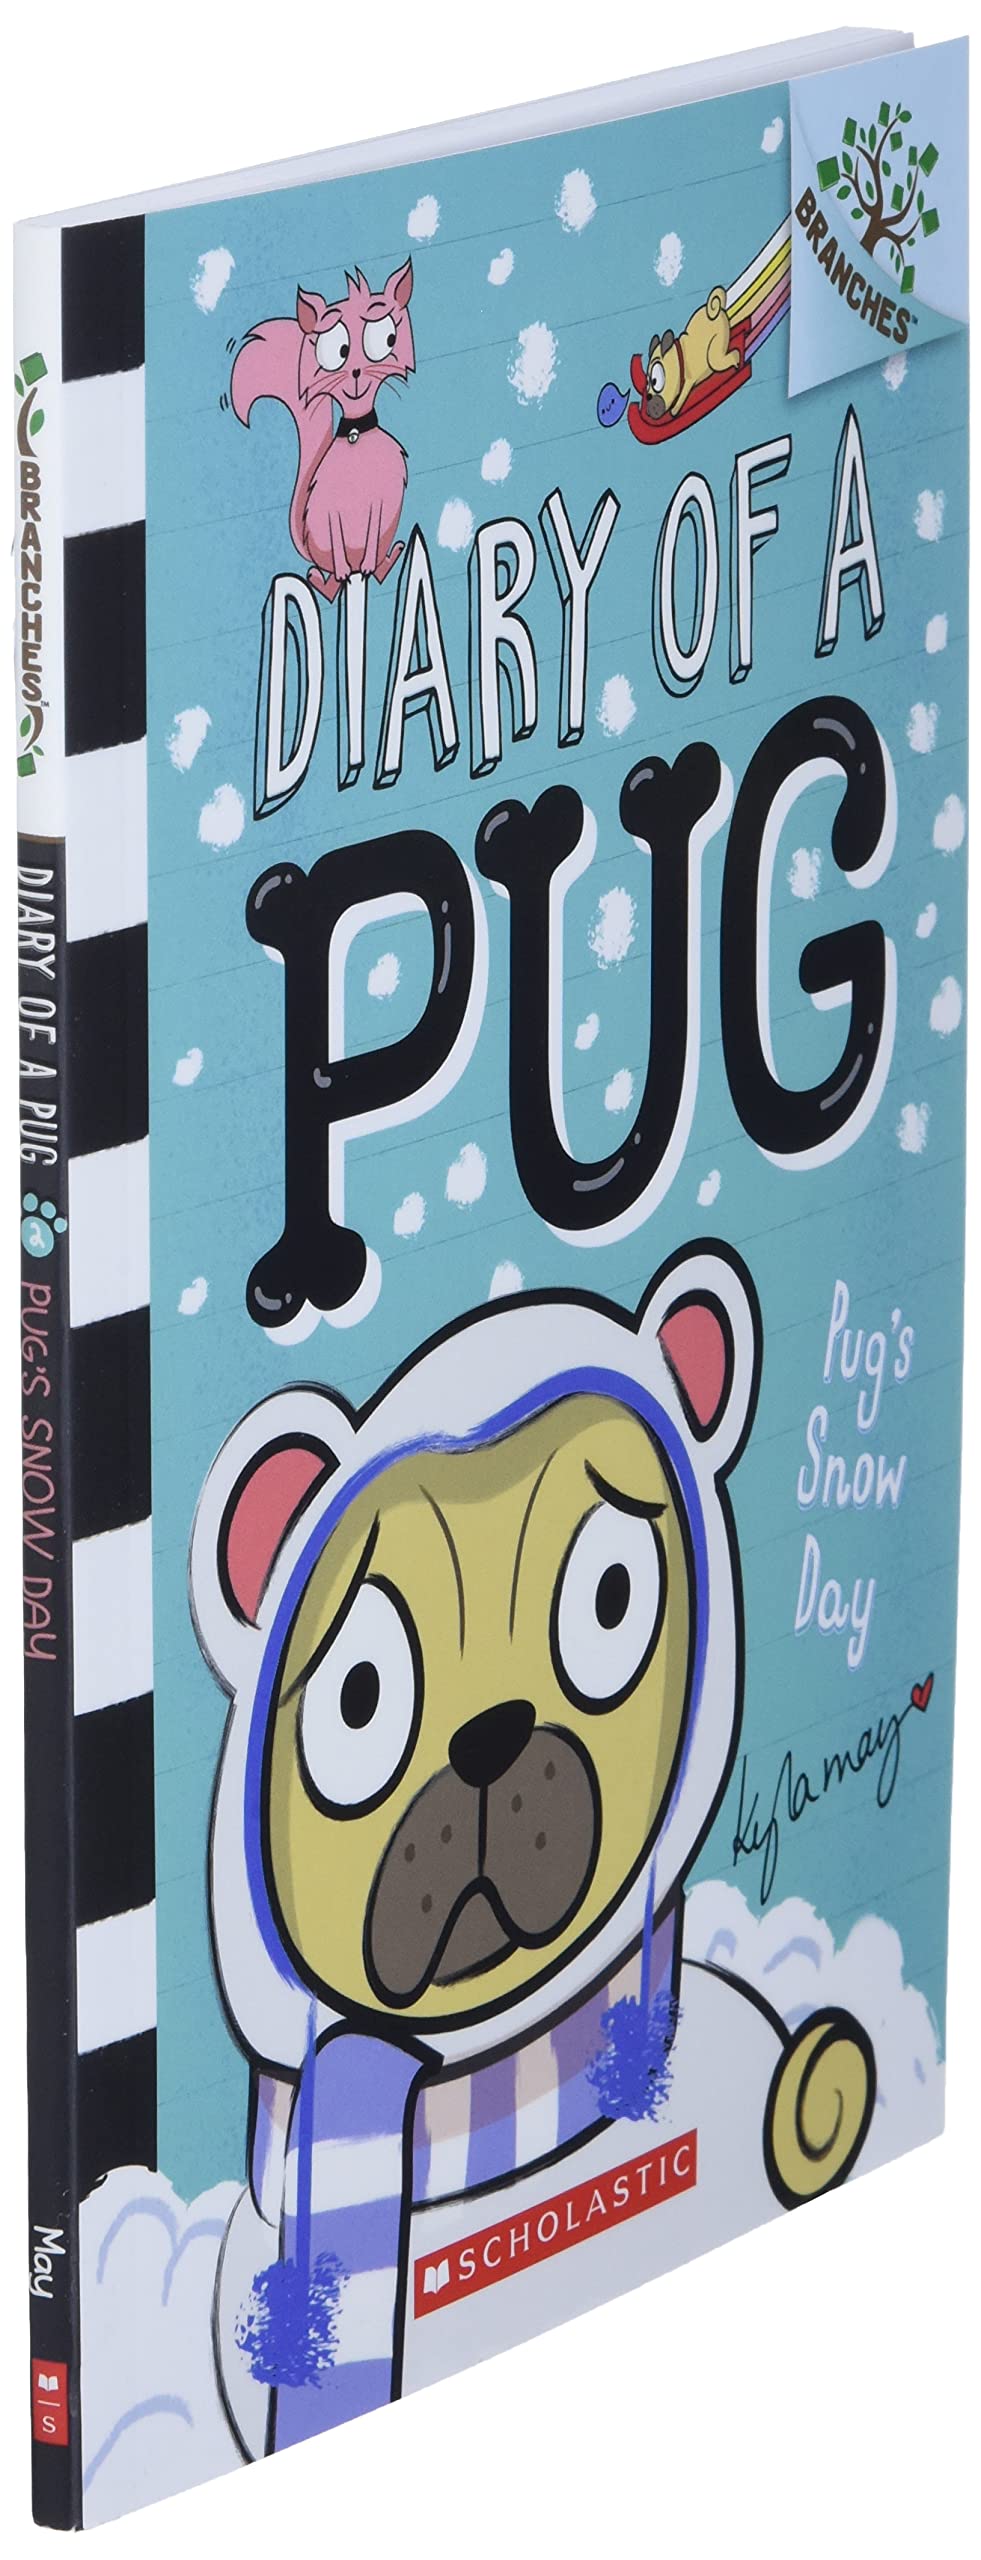 Pug’s Snow Day: A Branches Book (Diary of a Pug #2)